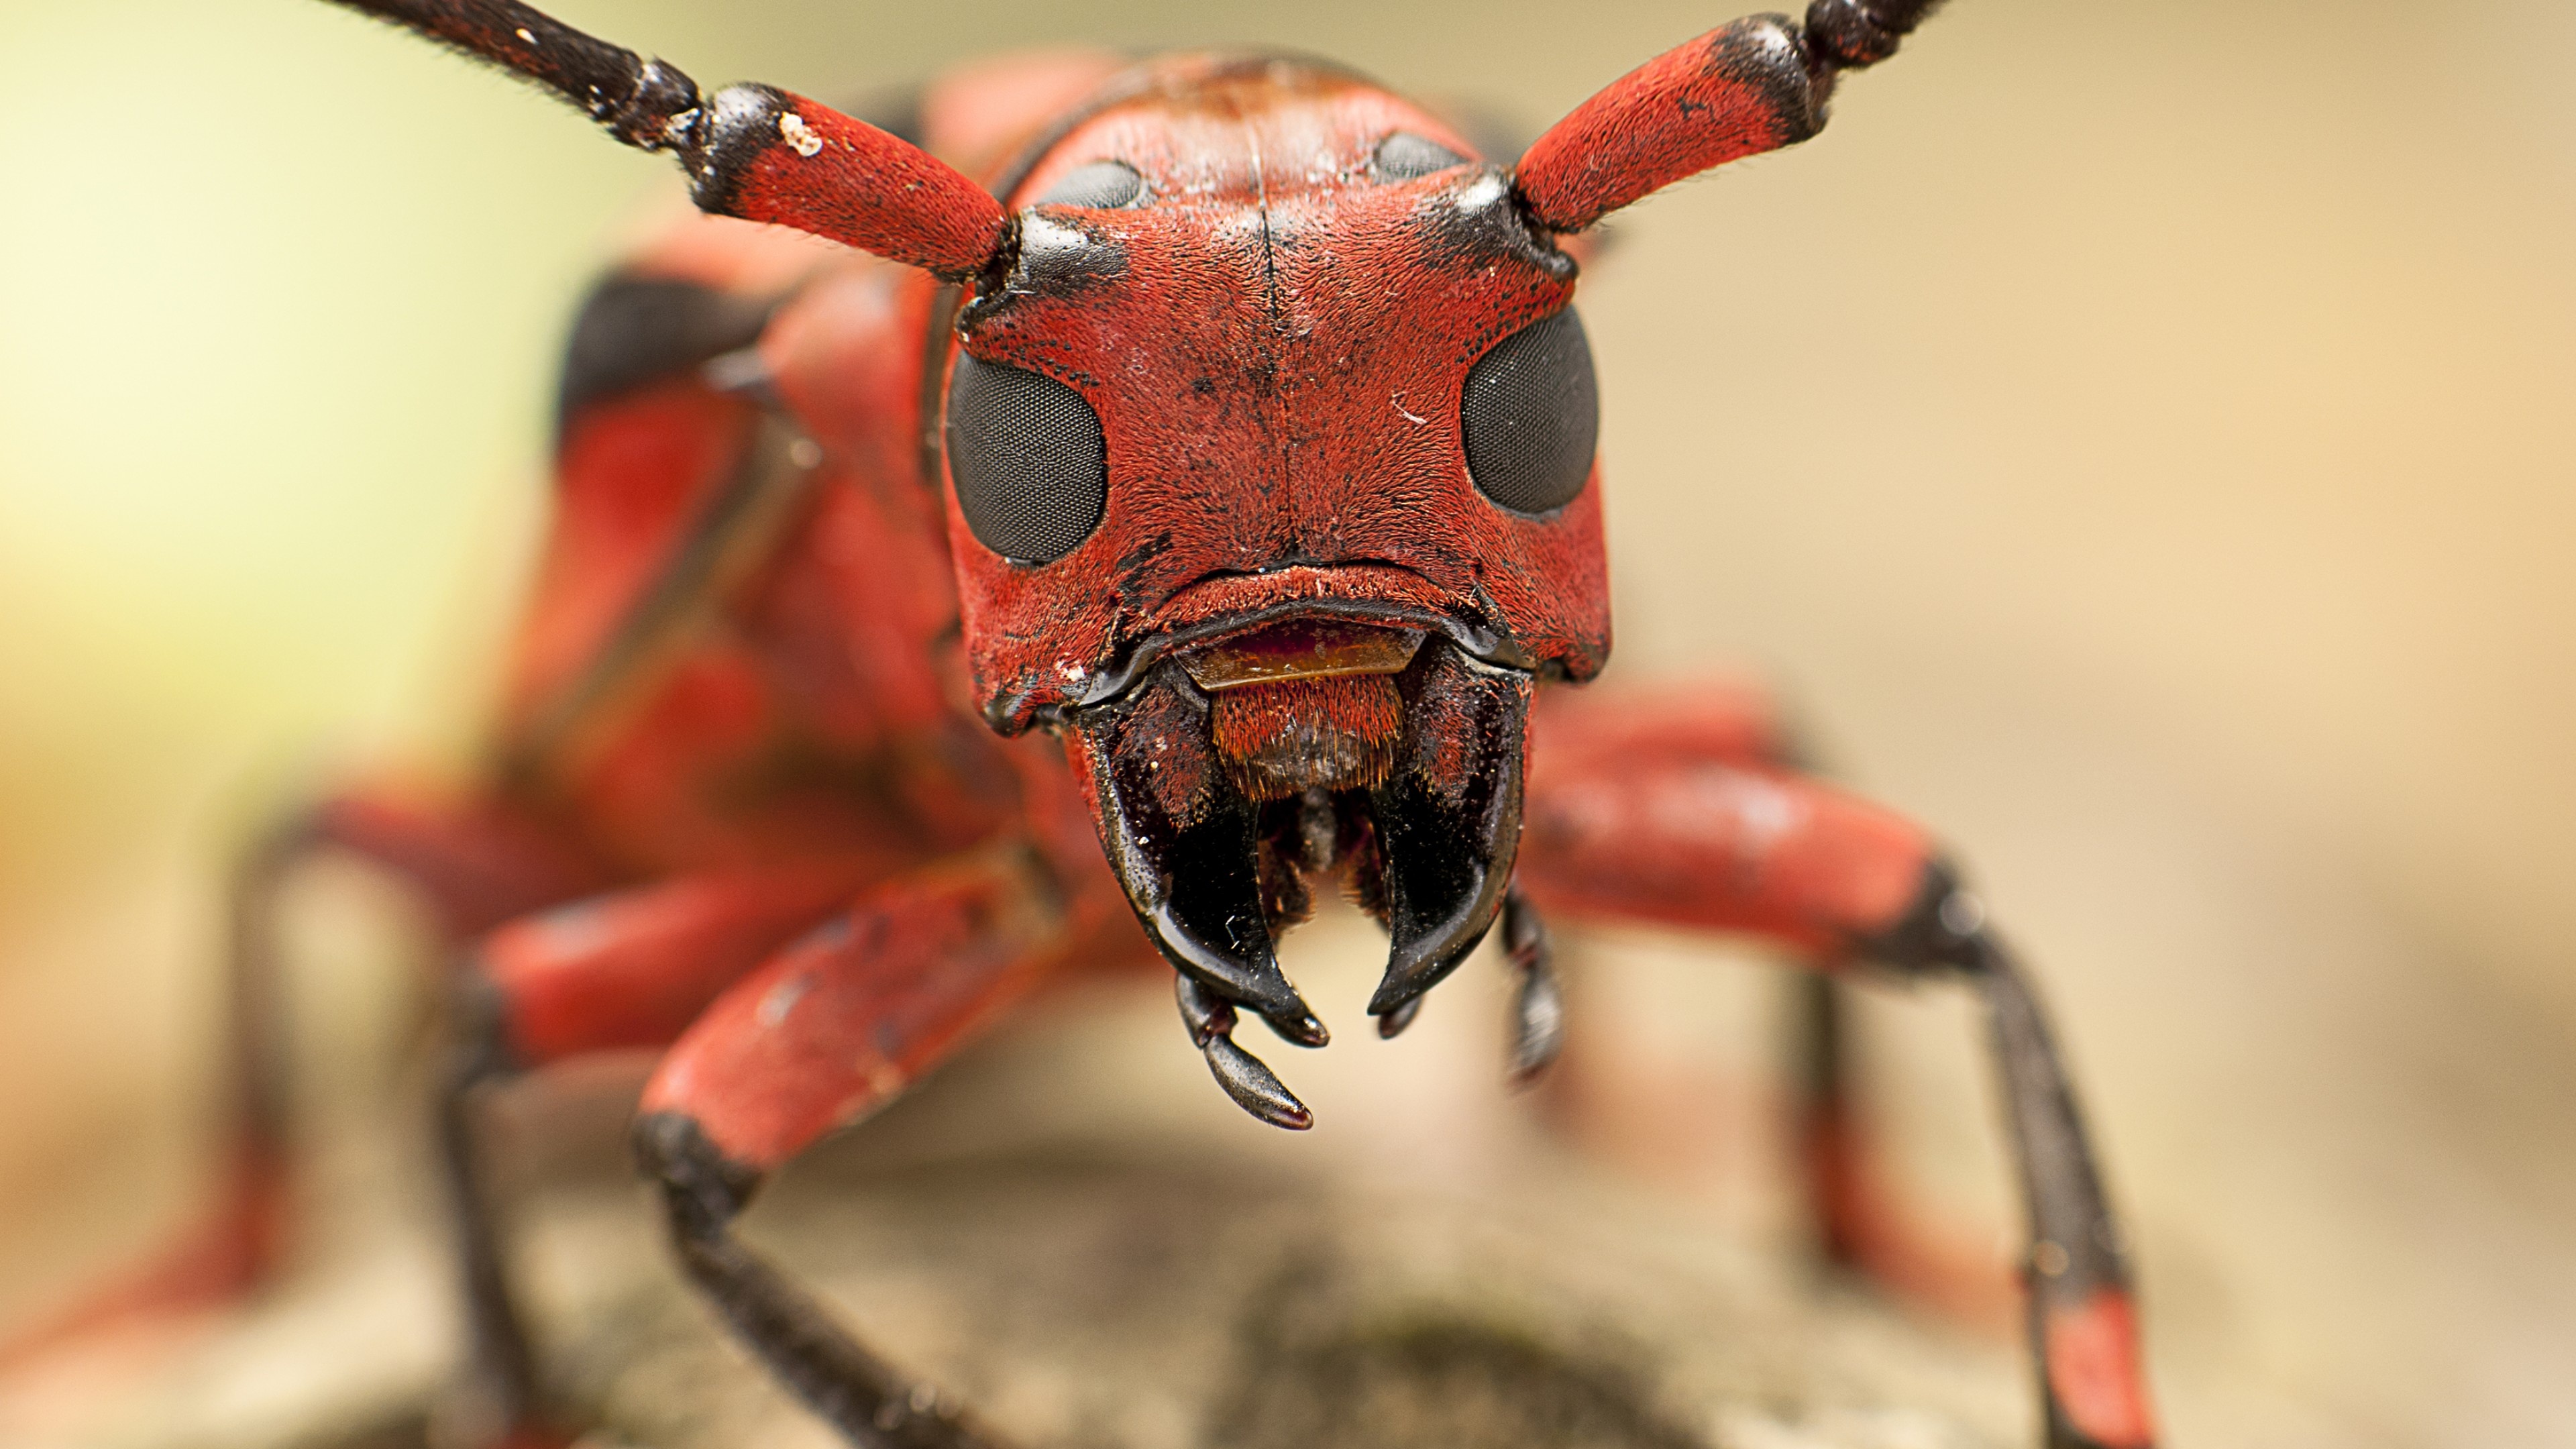 Macro ant wallpaper, Intricate details, Close-up beauty, Awesome animal photography, 3840x2160 4K Desktop